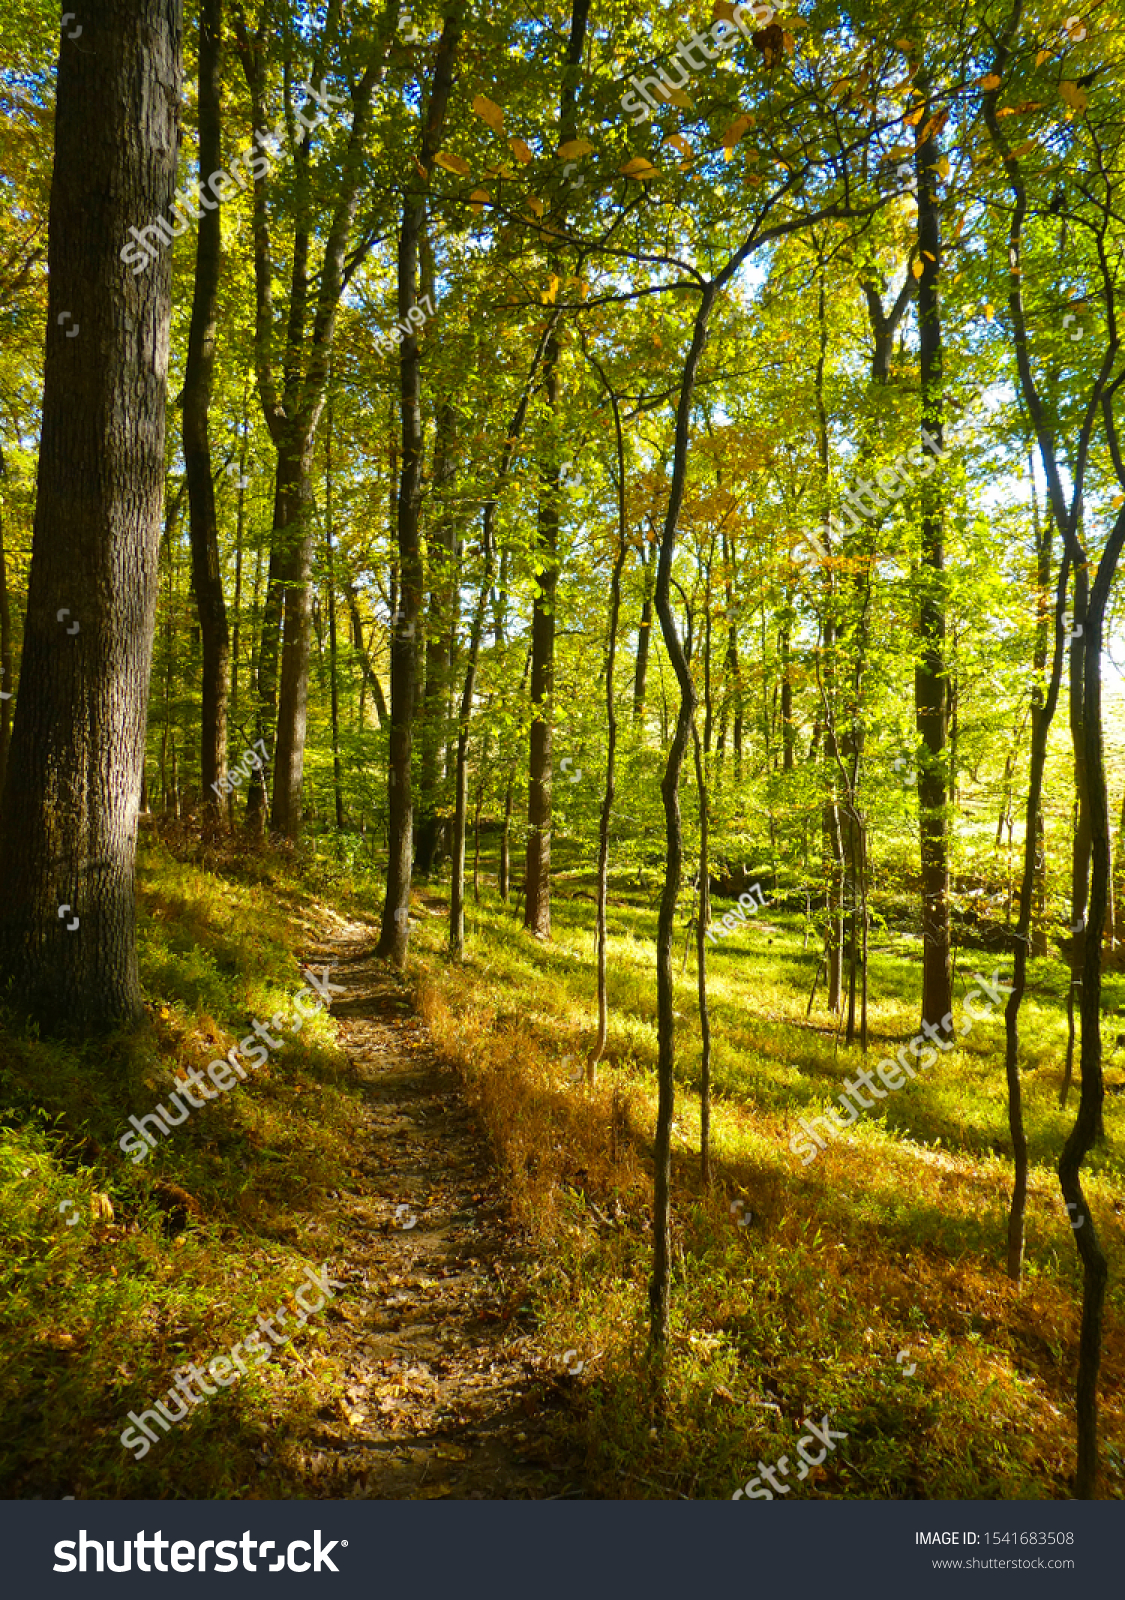 Scenic view of a hiking trail going through a forest in Maryland with the sun shining. #1541683508